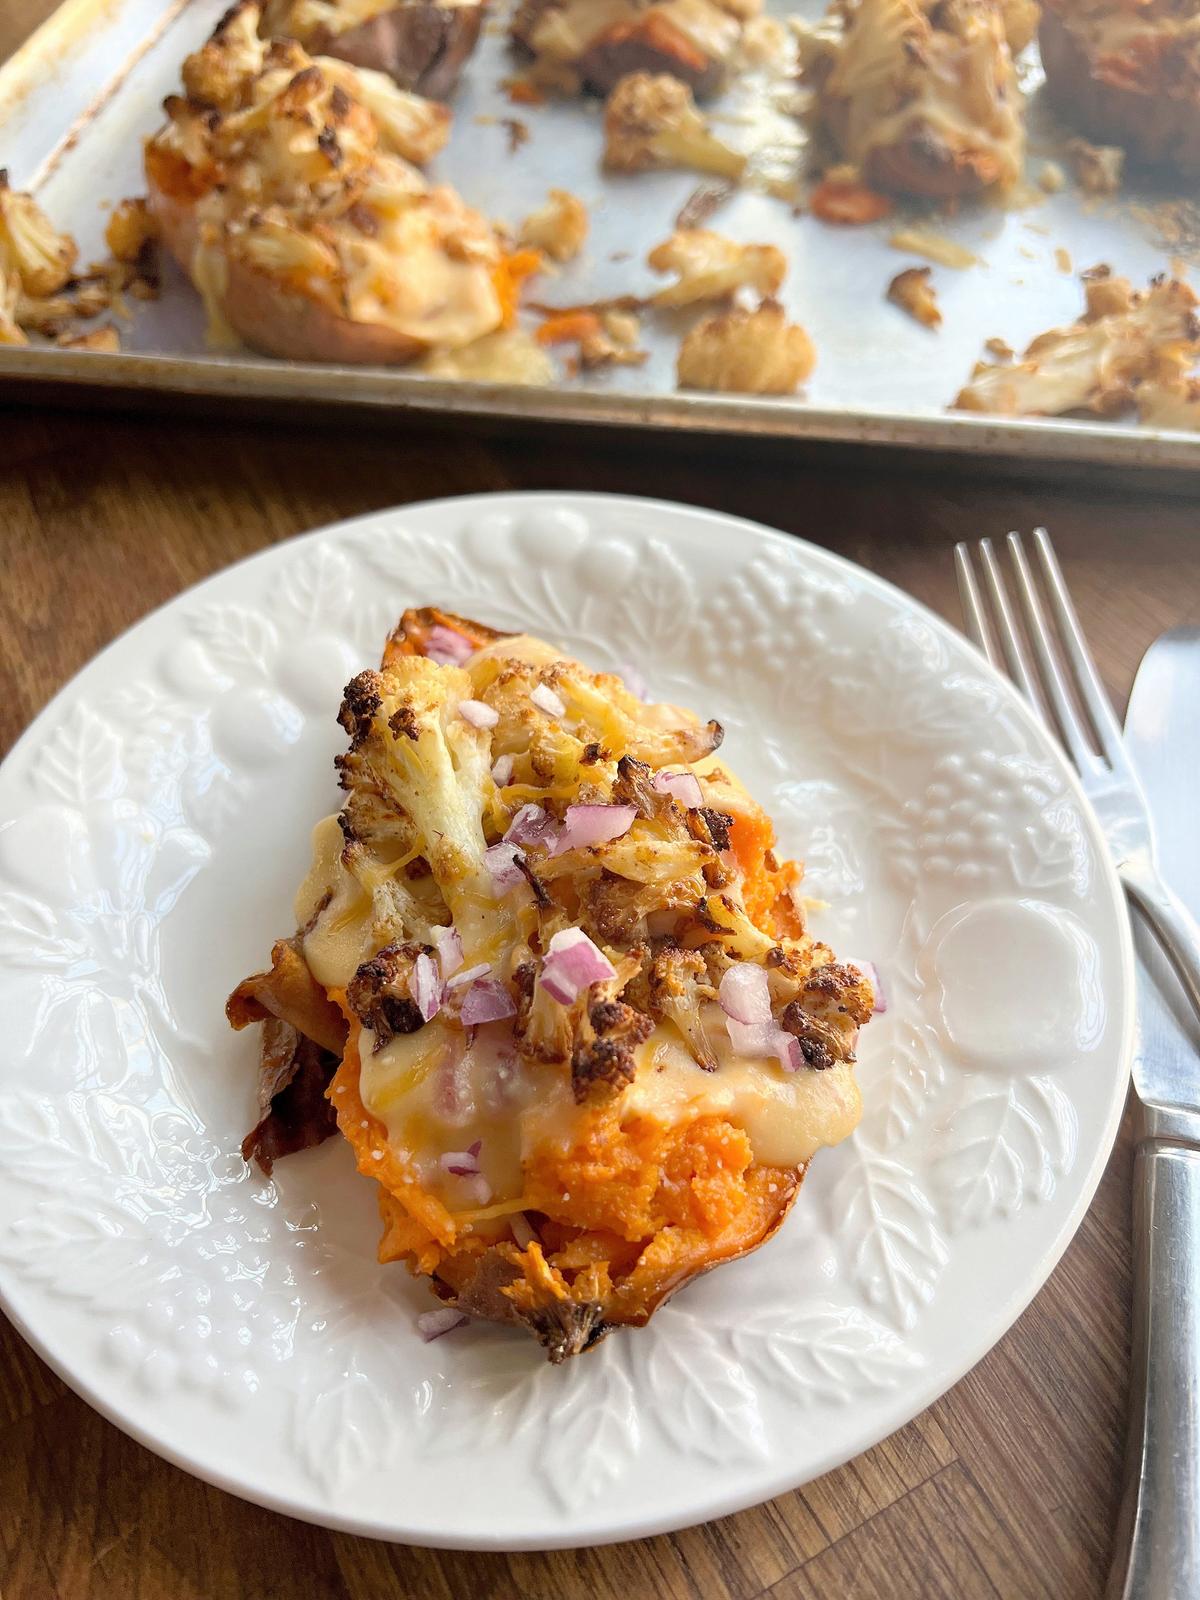 Sweet potatoes stuffed with cheesy, roasted cauliflower make a quick and easy vegetarian dinner. (Gretchen McKay/Pittsburgh Post-Gazette/TNS)